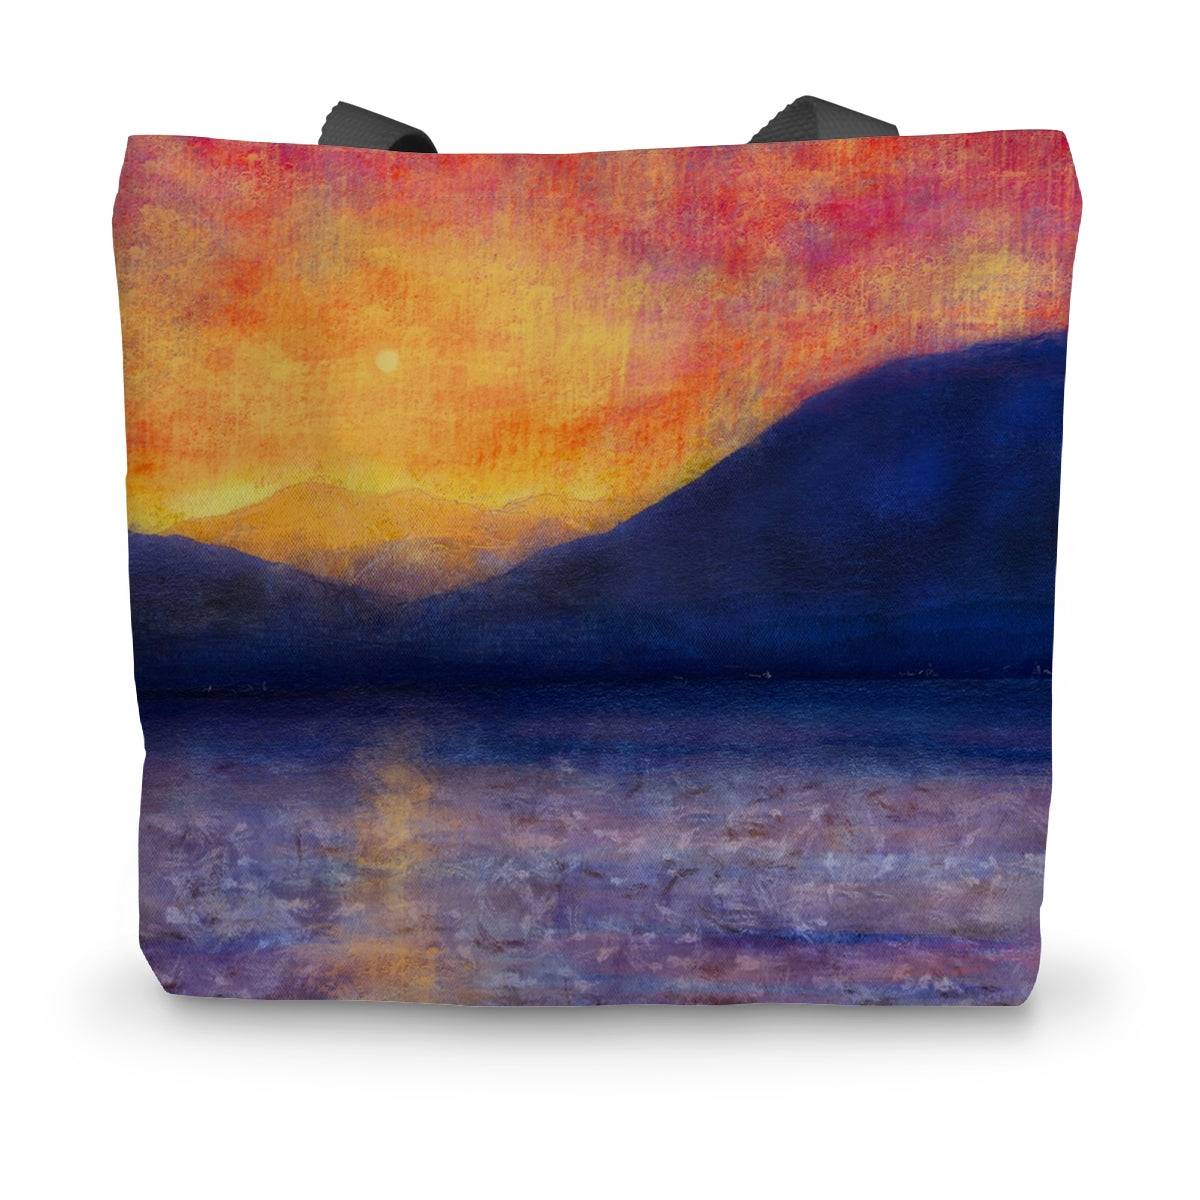 Sunset Approaching Mull Art Gifts Canvas Tote Bag-Bags-Hebridean Islands Art Gallery-14"x18.5"-Paintings, Prints, Homeware, Art Gifts From Scotland By Scottish Artist Kevin Hunter